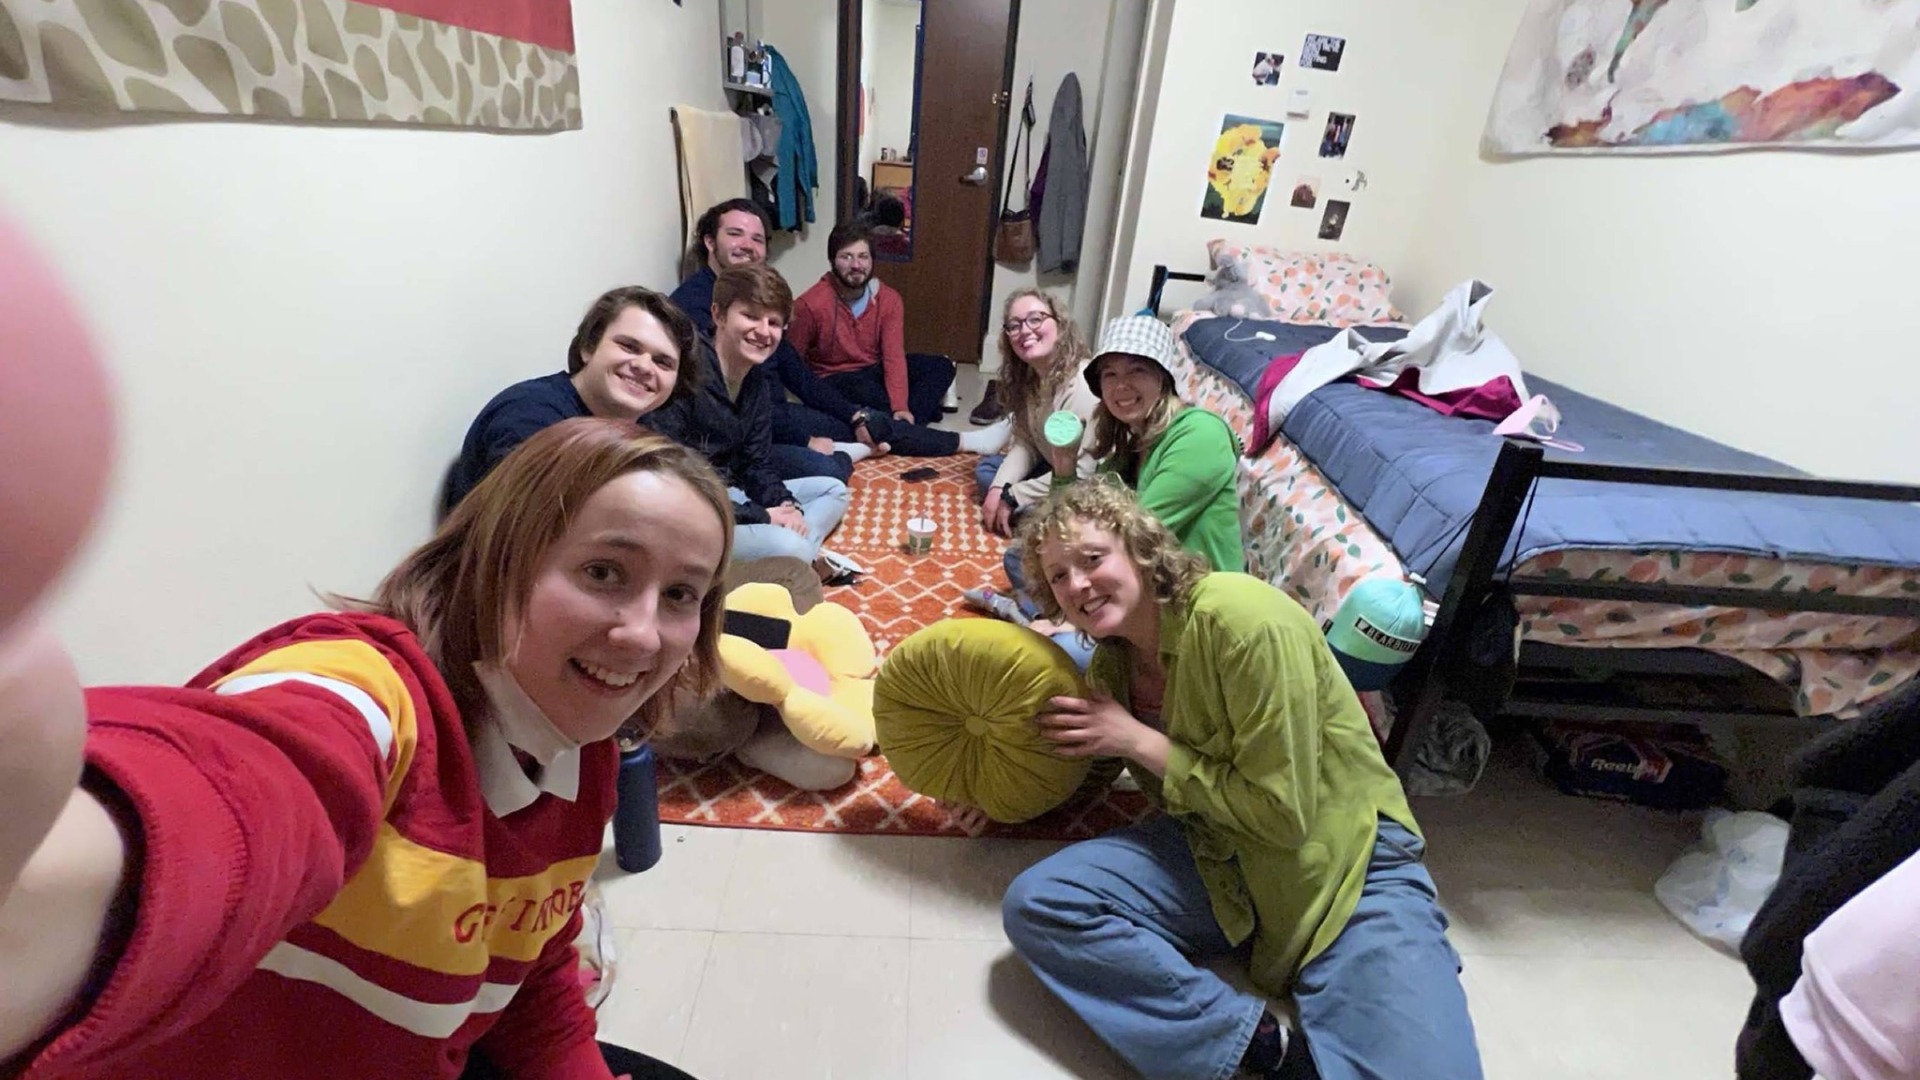 Me and my friends in a dorm room, huddled together in the small single together the selfie